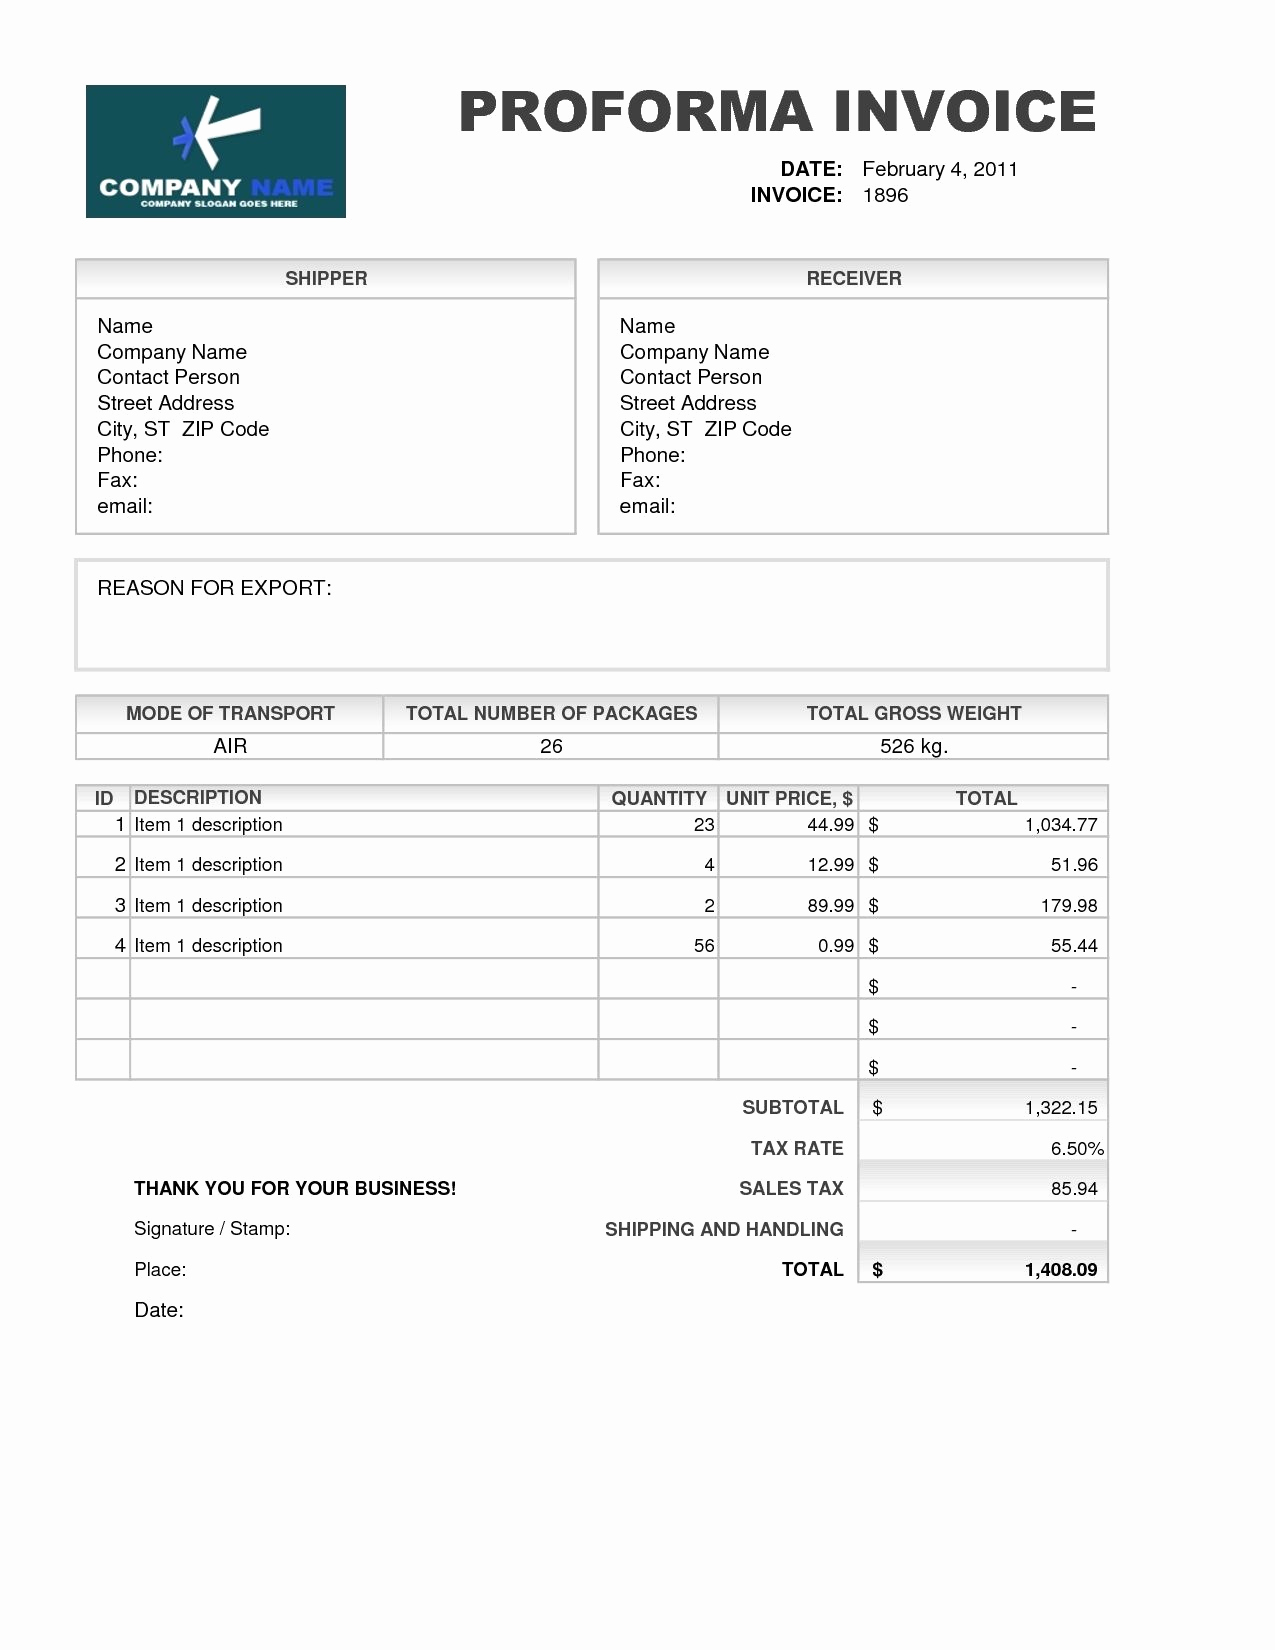 Pro forma Invoice Template Lovely Samples Of Proforma Invoice Invoice Template Free 2016